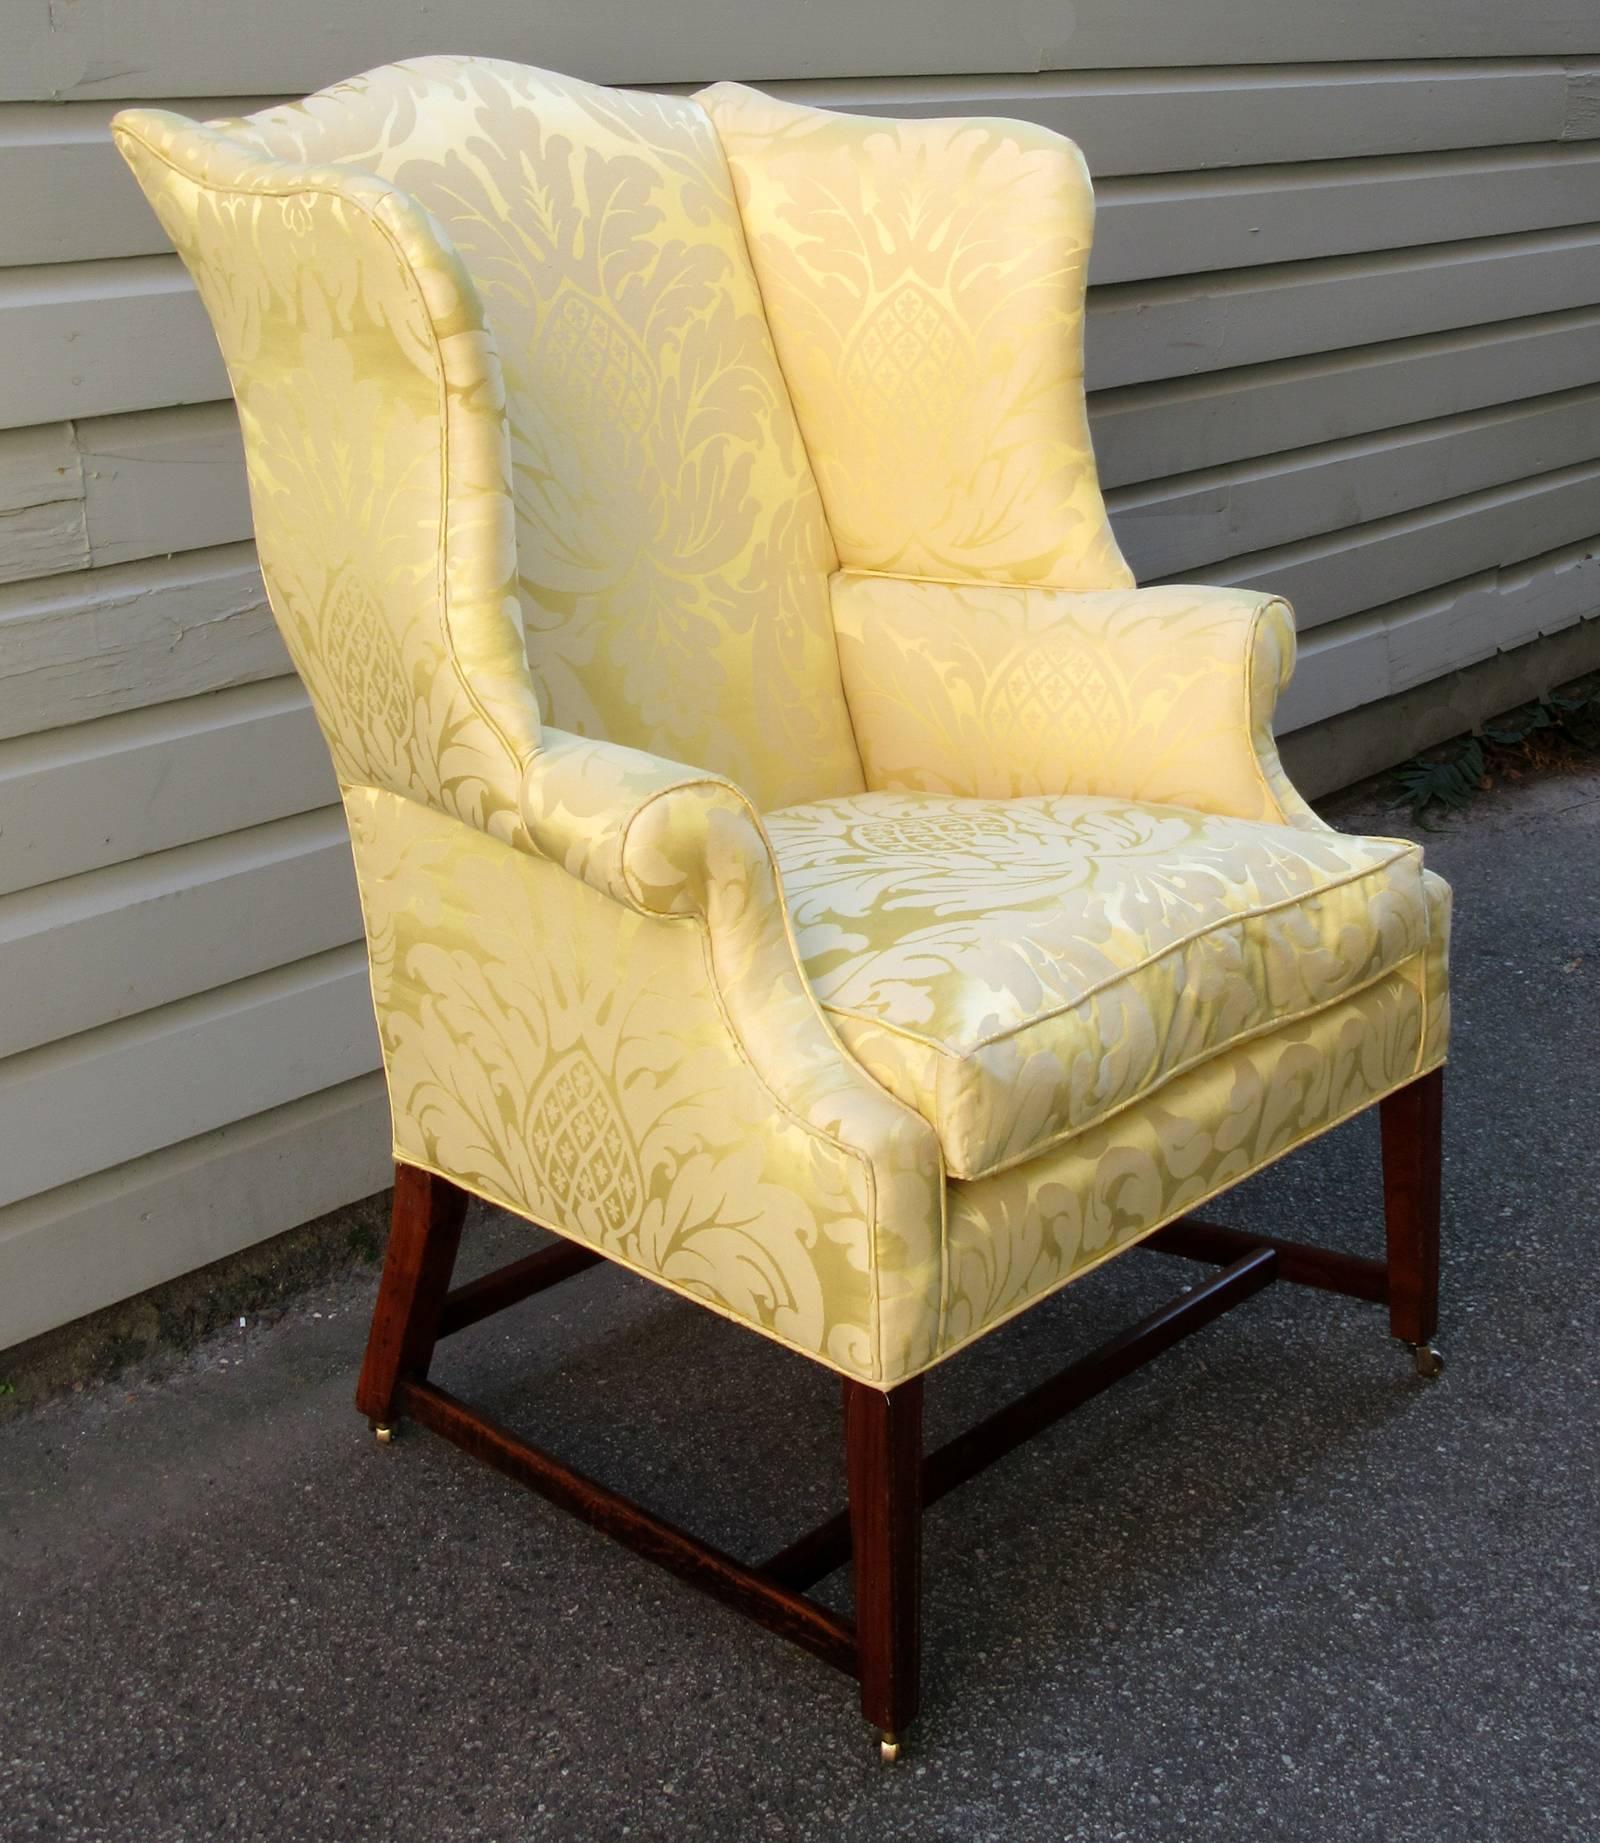 A federal upholstered wingback chair from Virginia, circa 1790, featuring new upholstery, a walnut frame with bell flower inlay on legs and new casters. The feet were reduced to accommodate the addition of the casters.